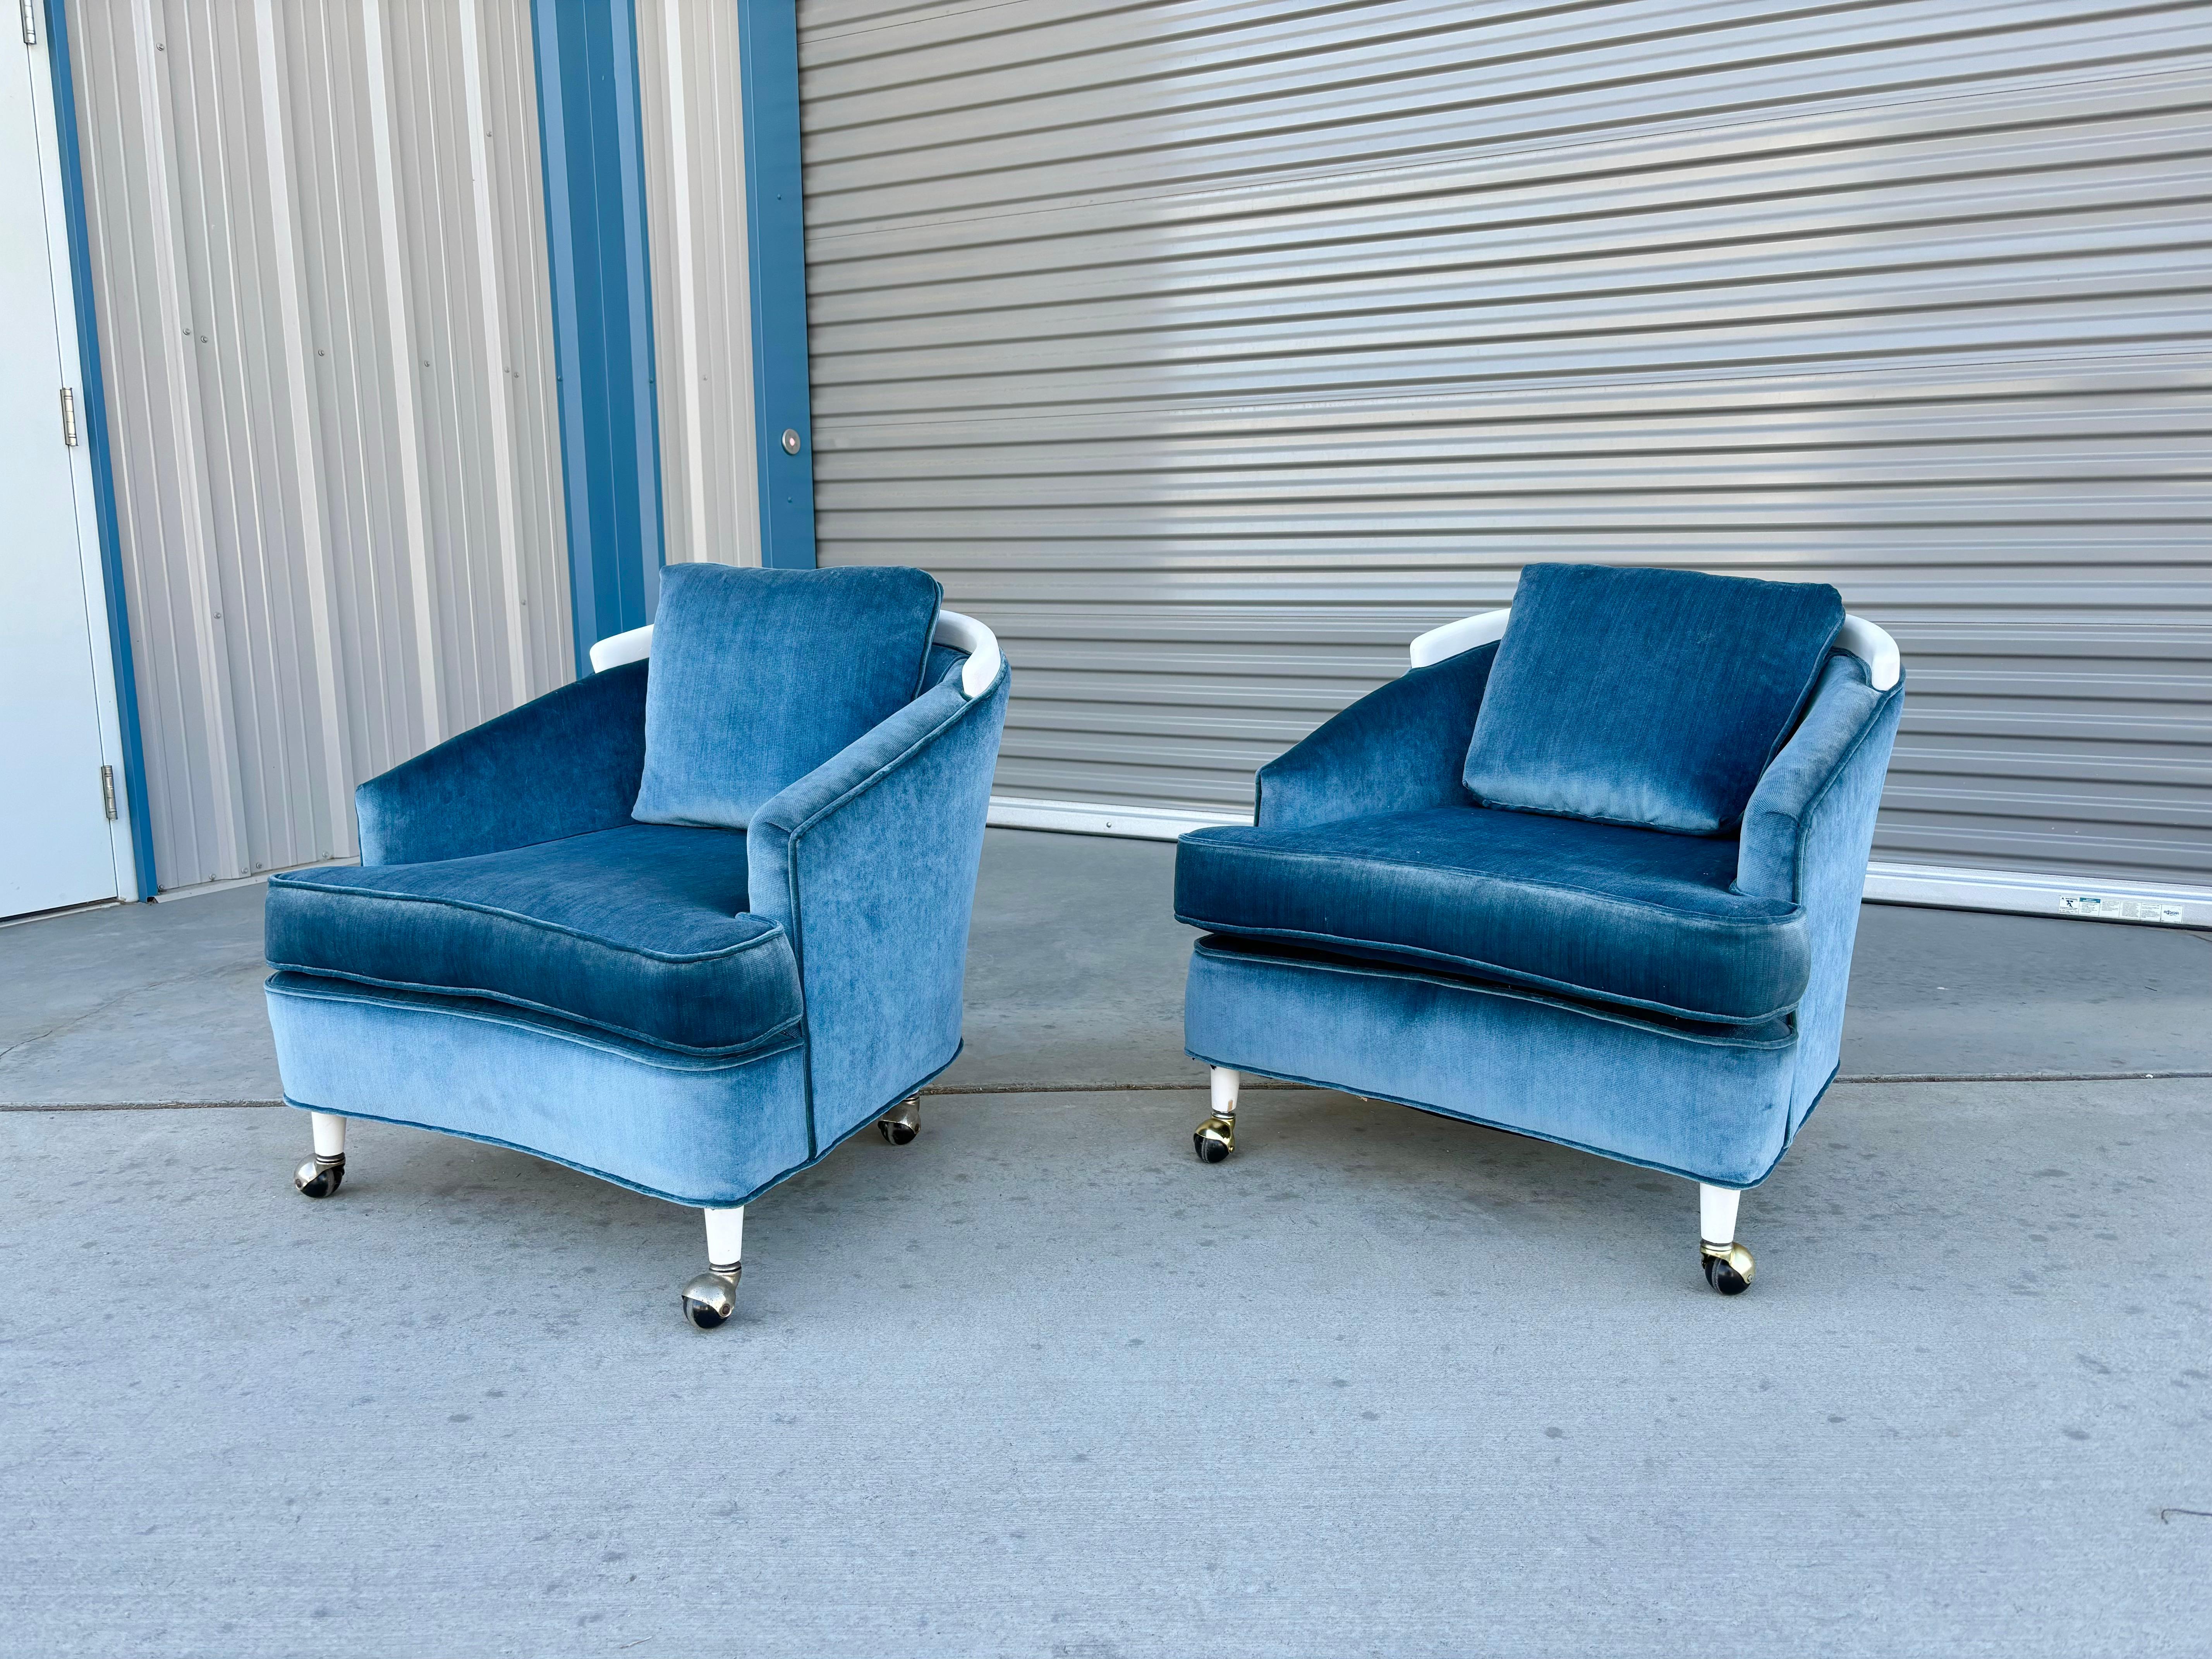 Mid-century velvet lounge chairs designed and manufactured in the United States circa 1960s. The chairs feature a newly blue velvet upholstery that is both comfortable and visually stunning. What sets these chairs apart is the elegant white curved